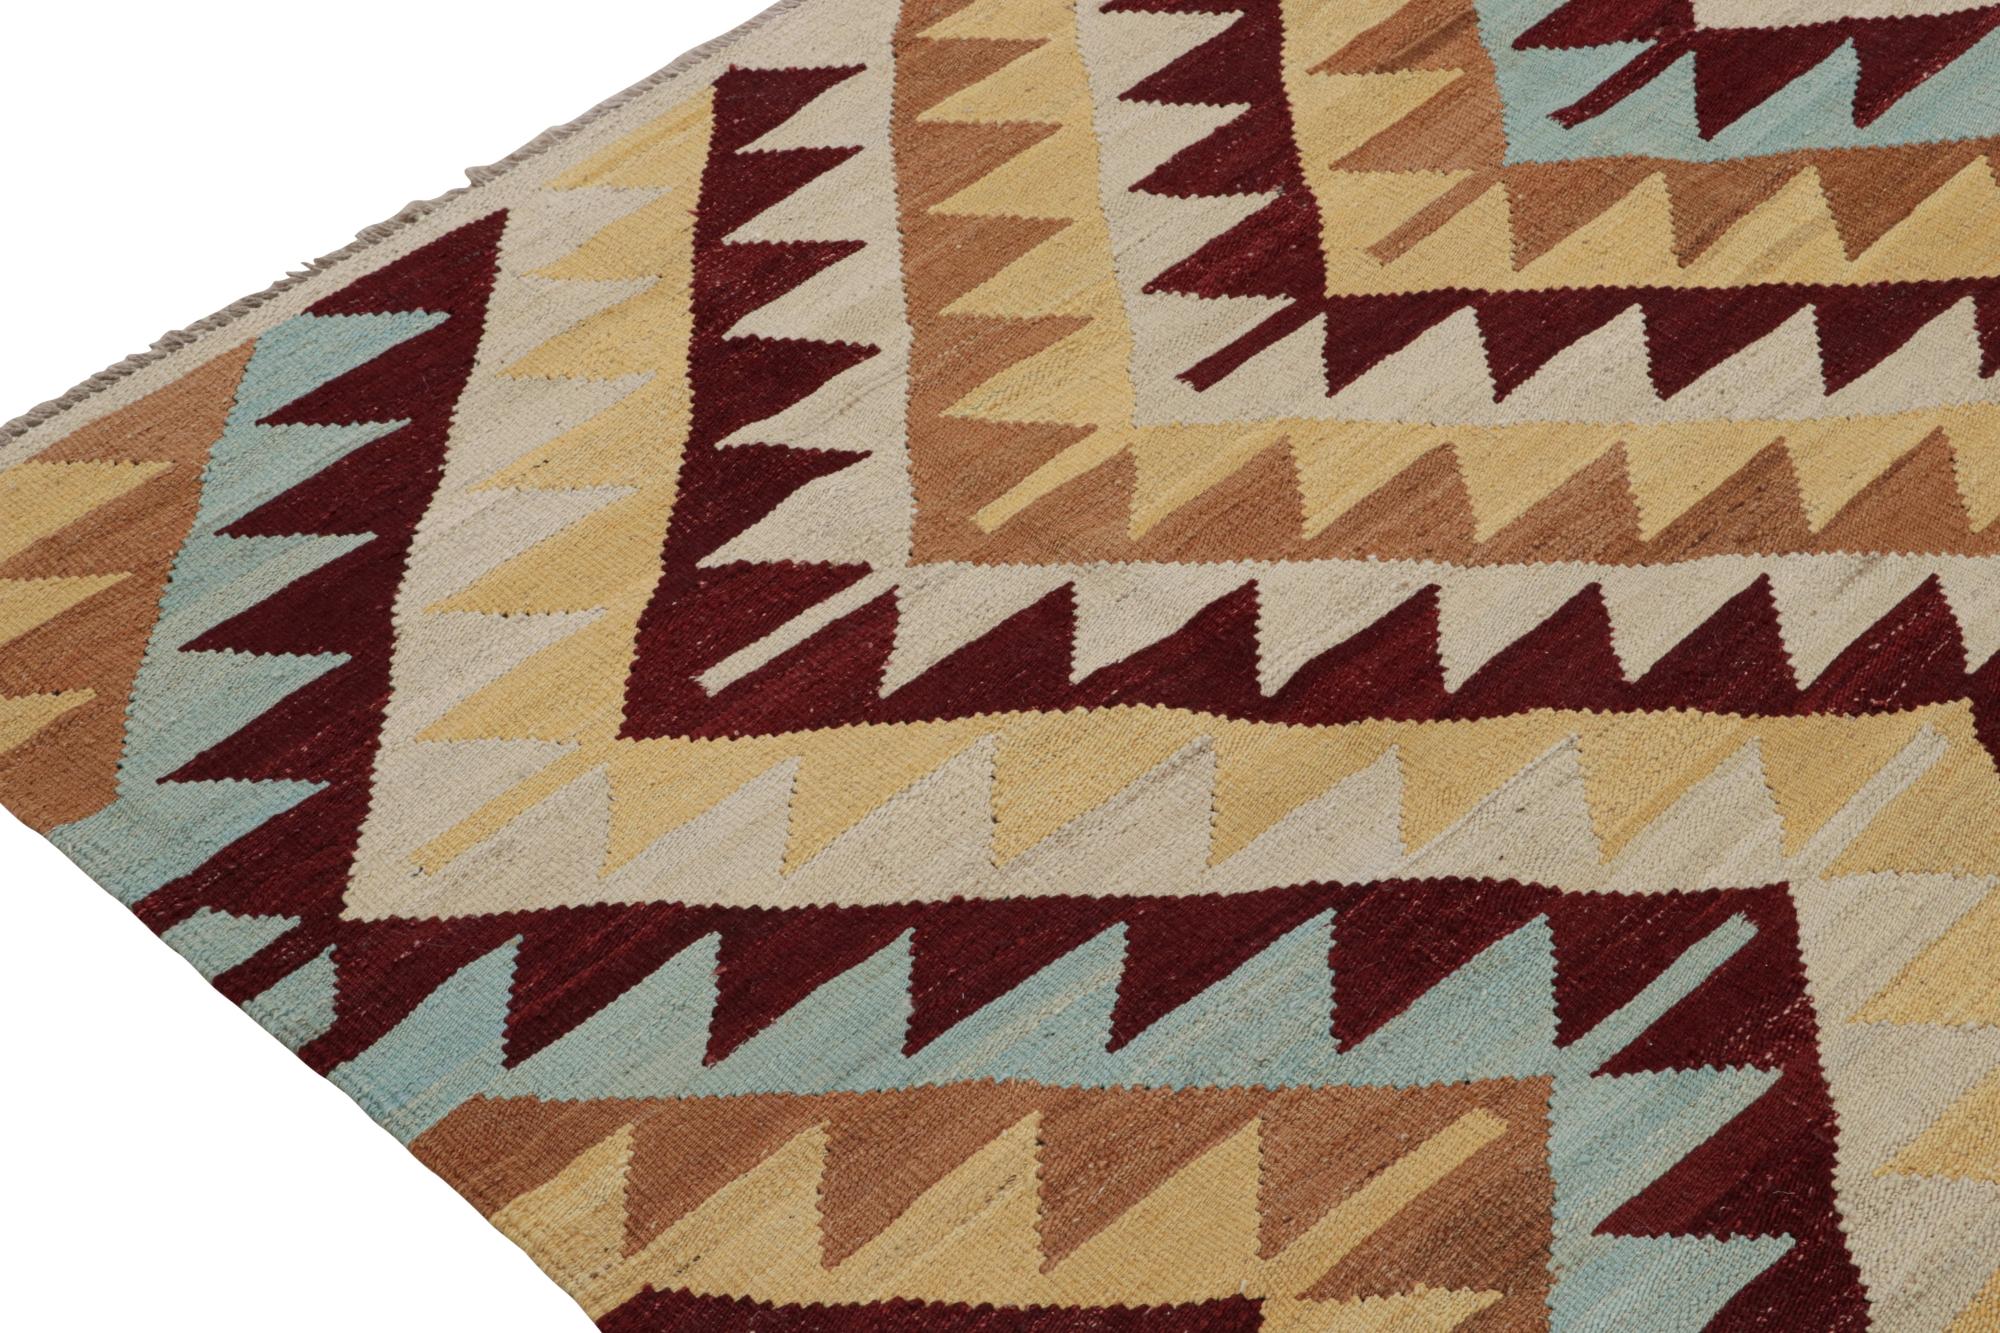 Contemporary Rug & Kilim’s Tribal Style Kilim in Red, Blue and Beige-Brown Geometric Patterns For Sale